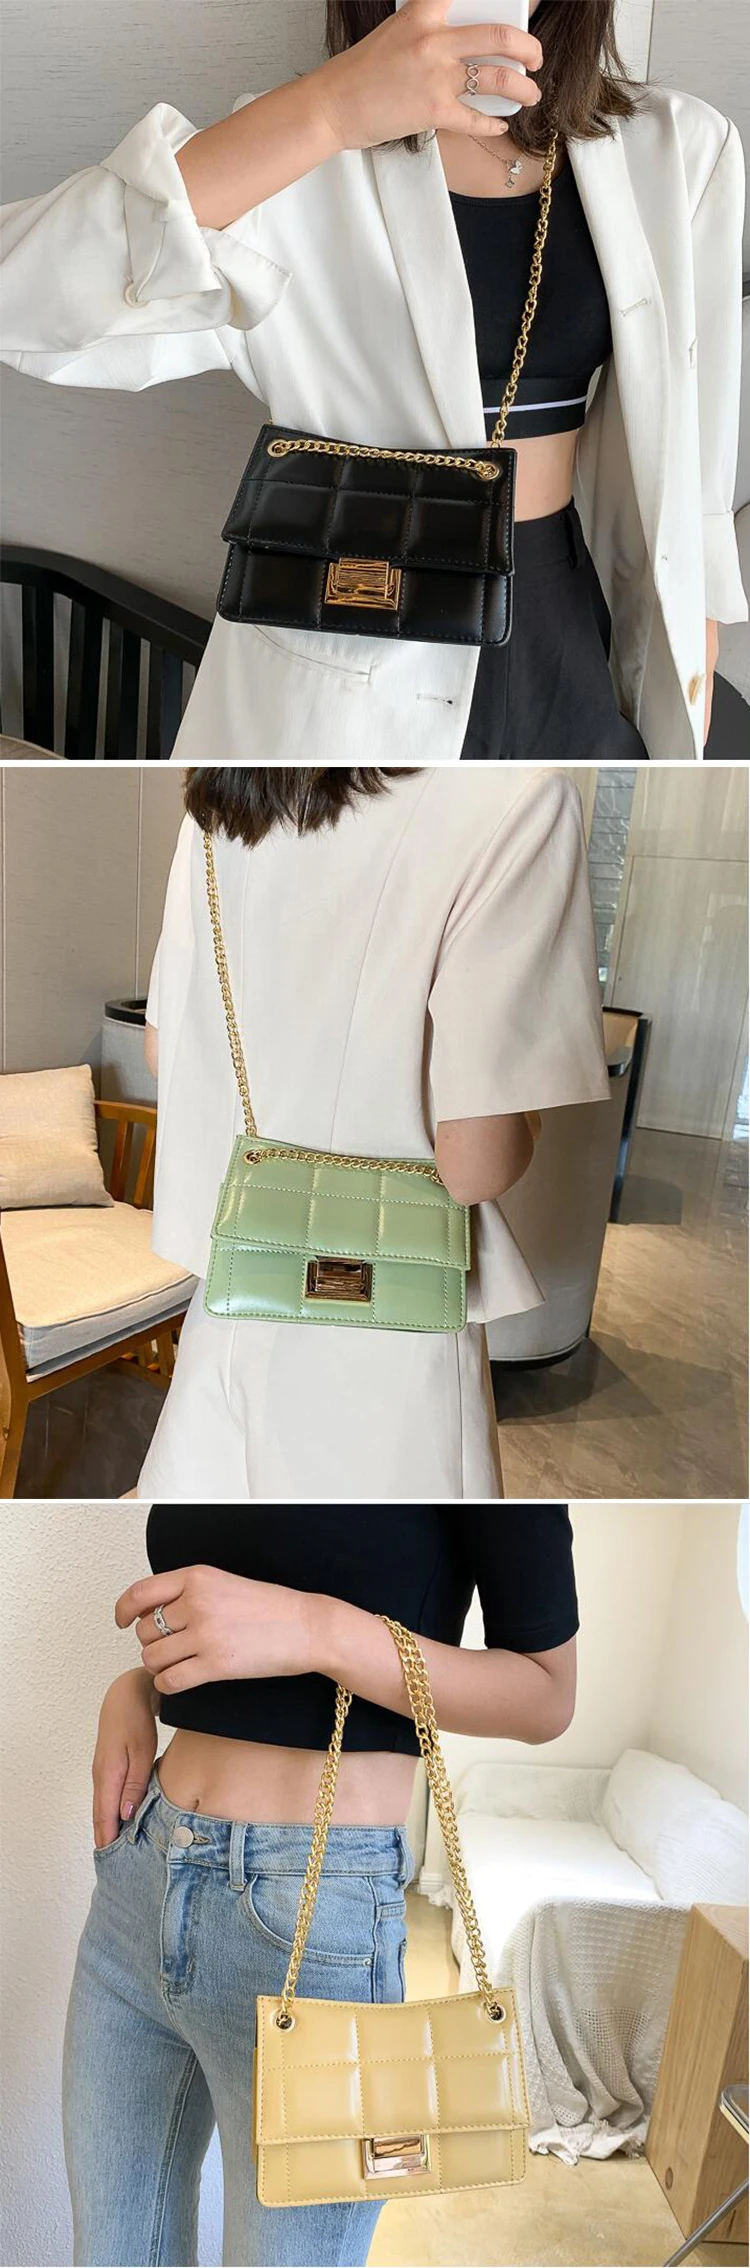 2021 luxury latest style ladies crossbody bag single shoulder chain handbags pu leather tote hand bags for women